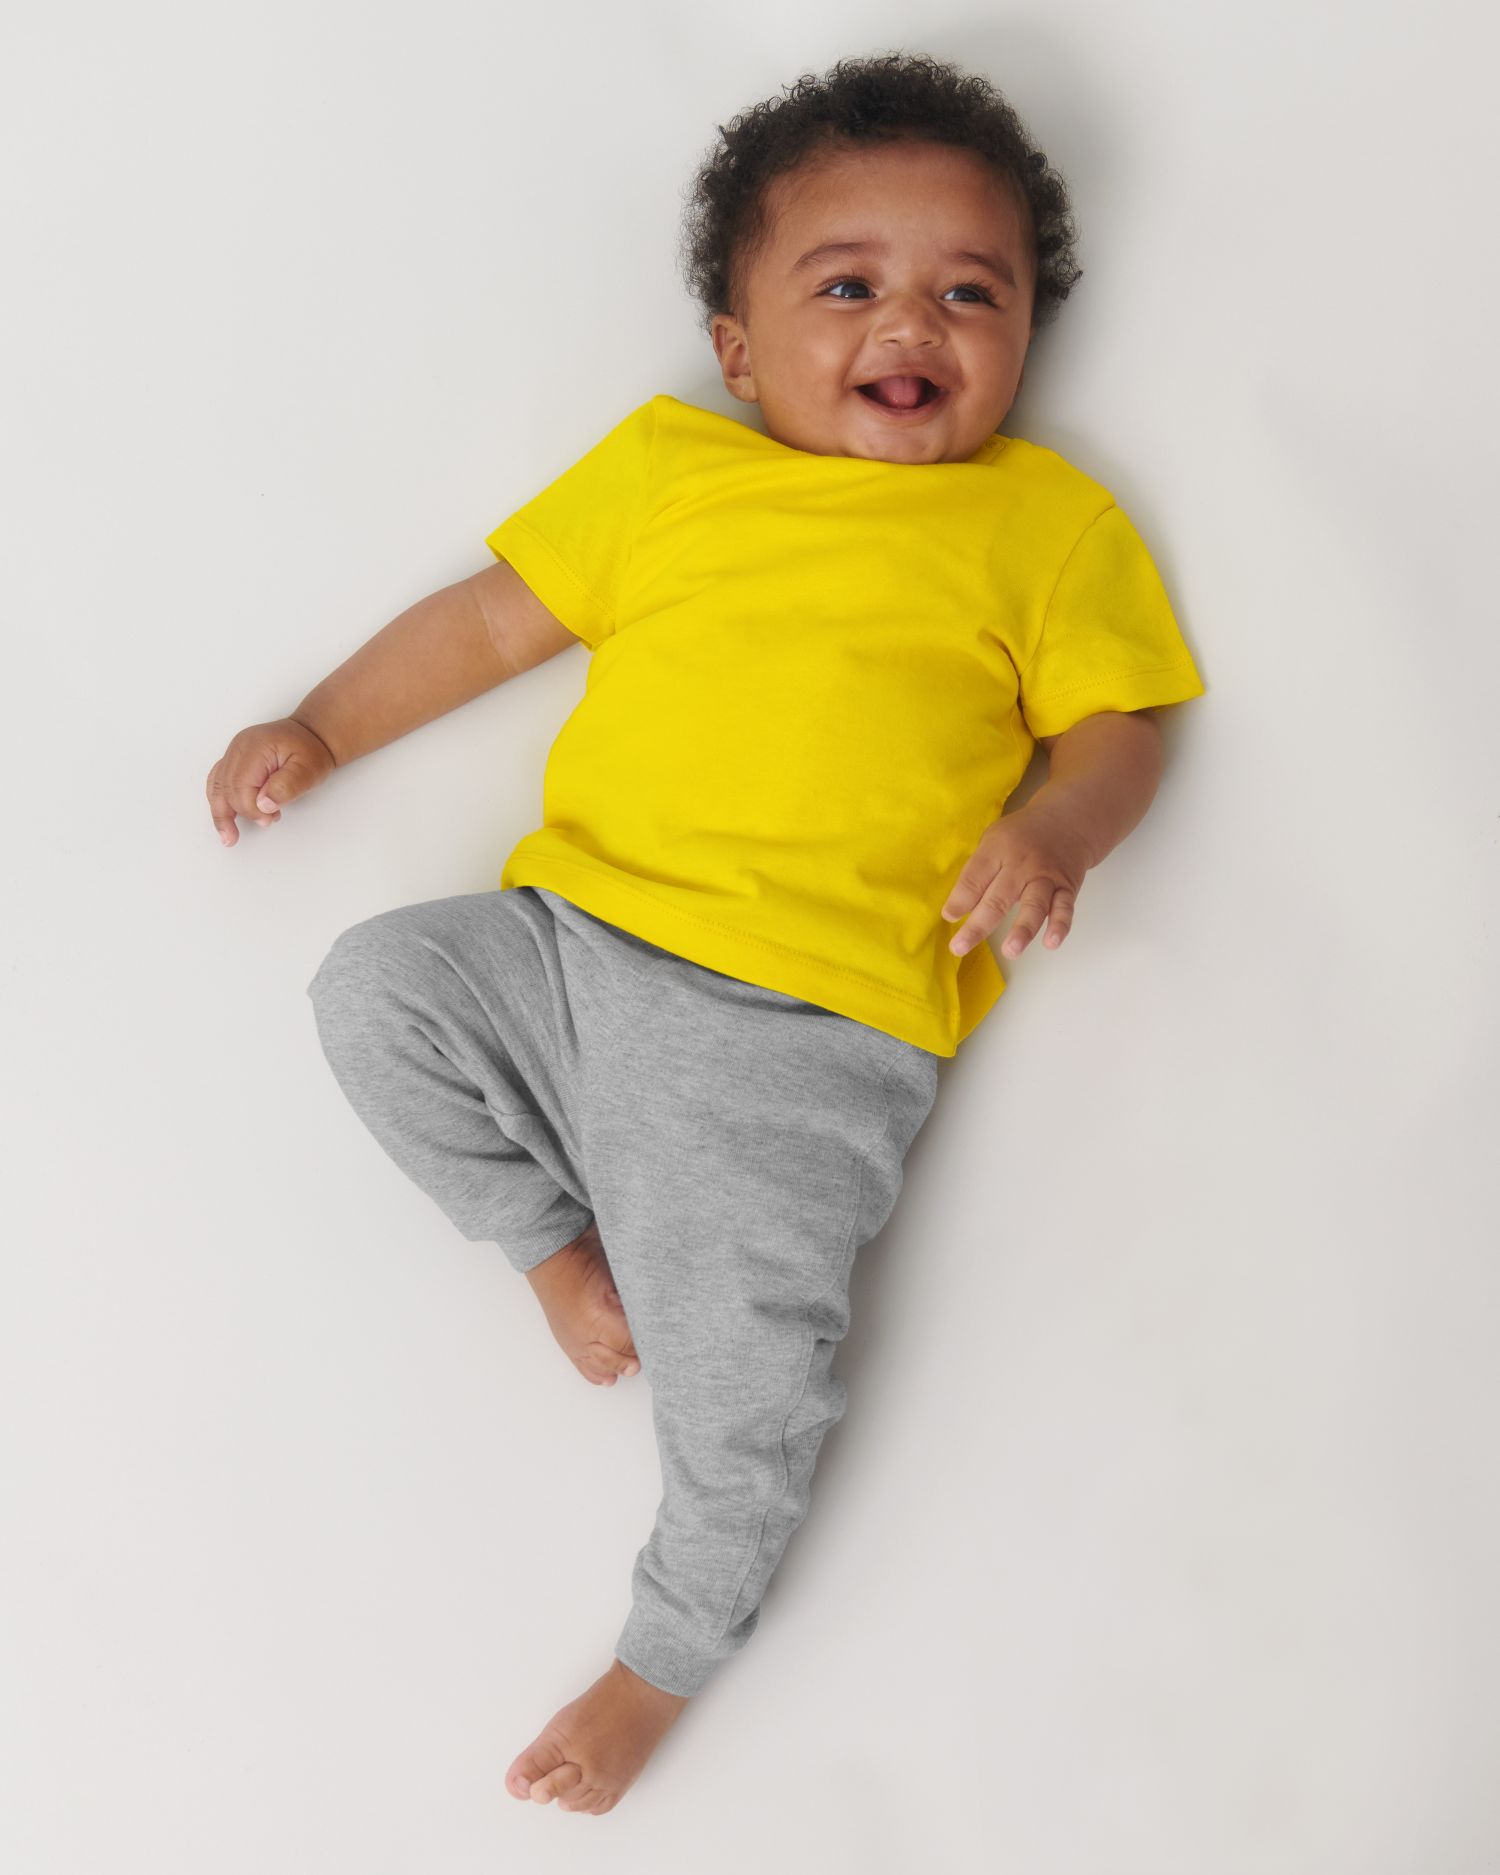 T-Shirt Baby Creator in Farbe Golden Yellow